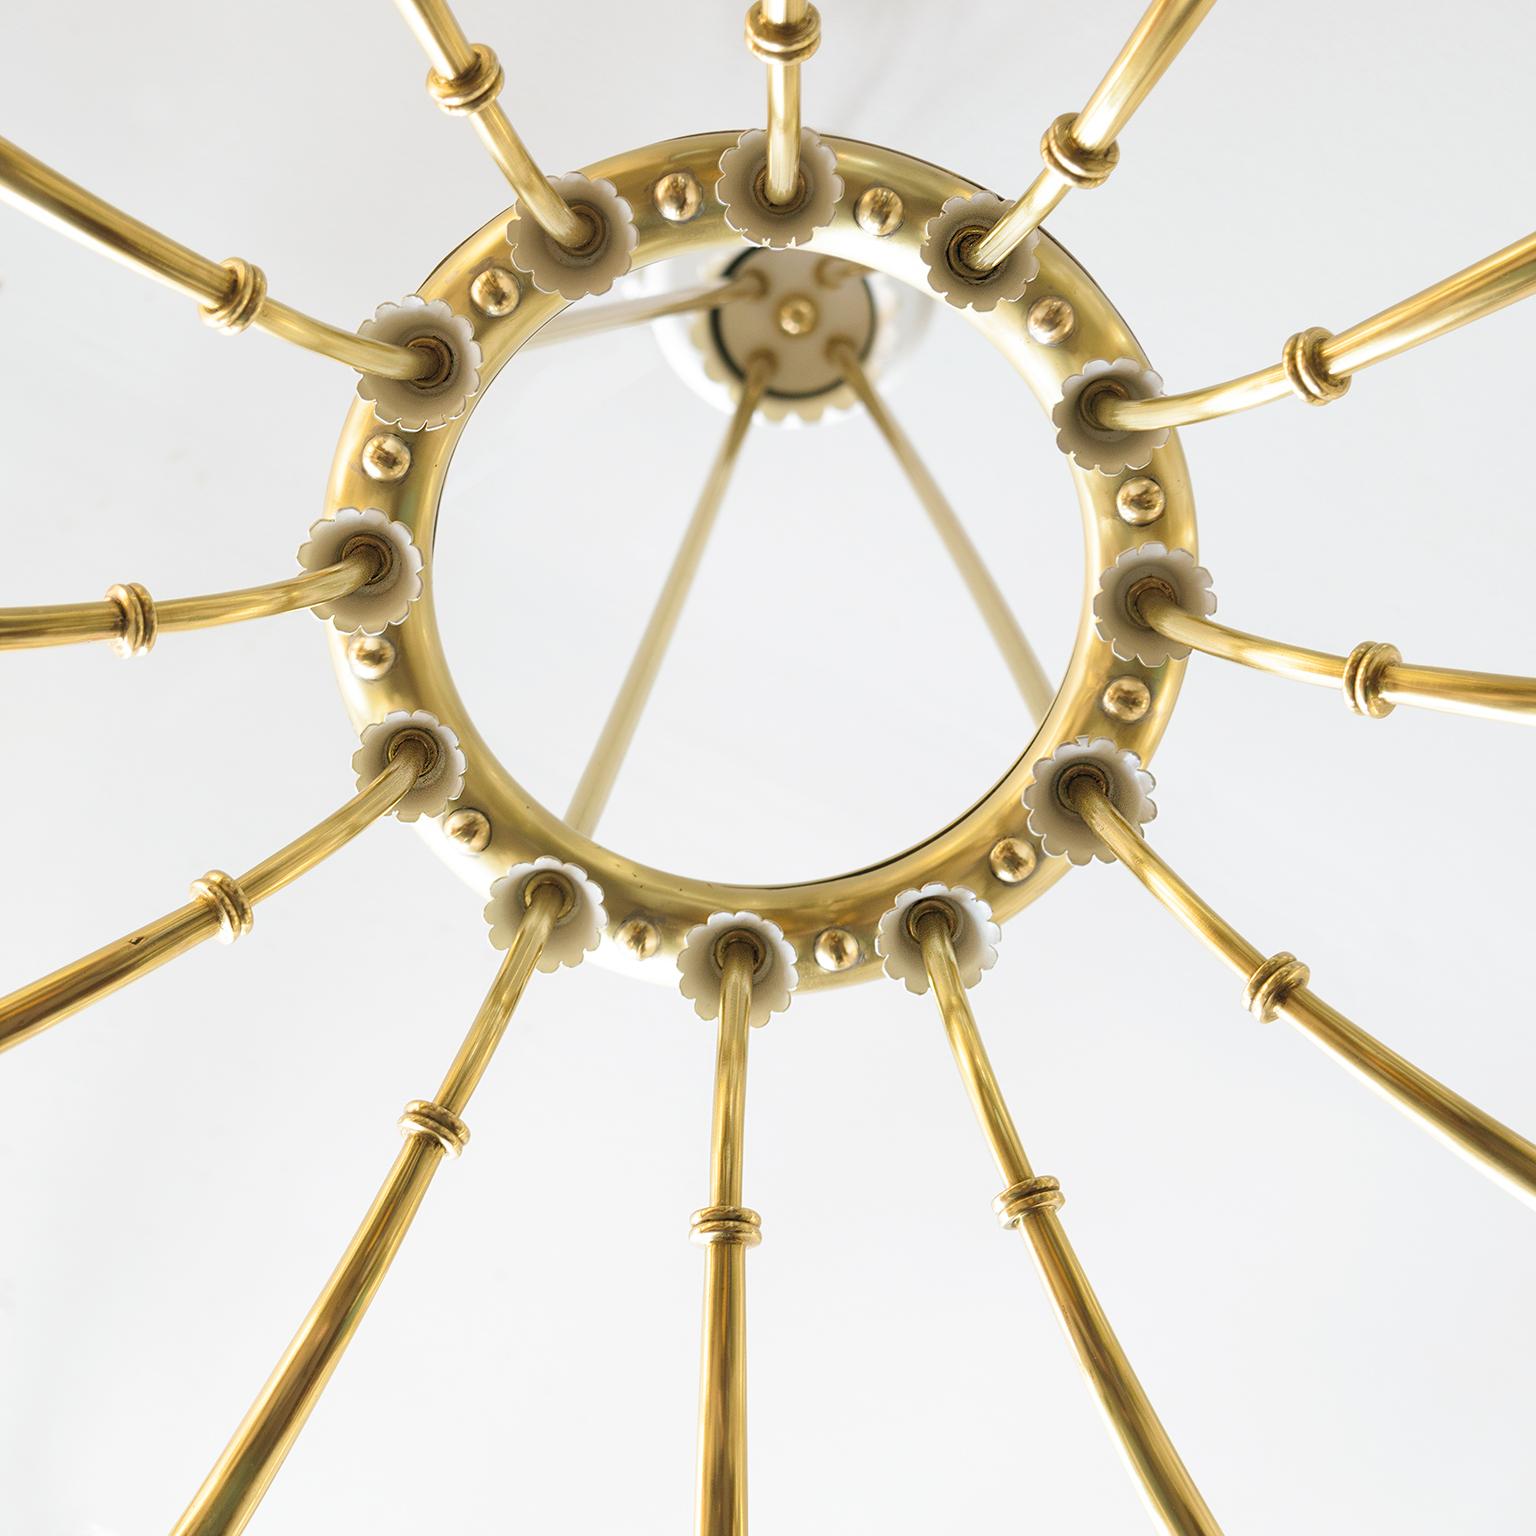 Large Scandinavian Modern 12-Arm Polished Brass Chandelier In Good Condition For Sale In New York, NY